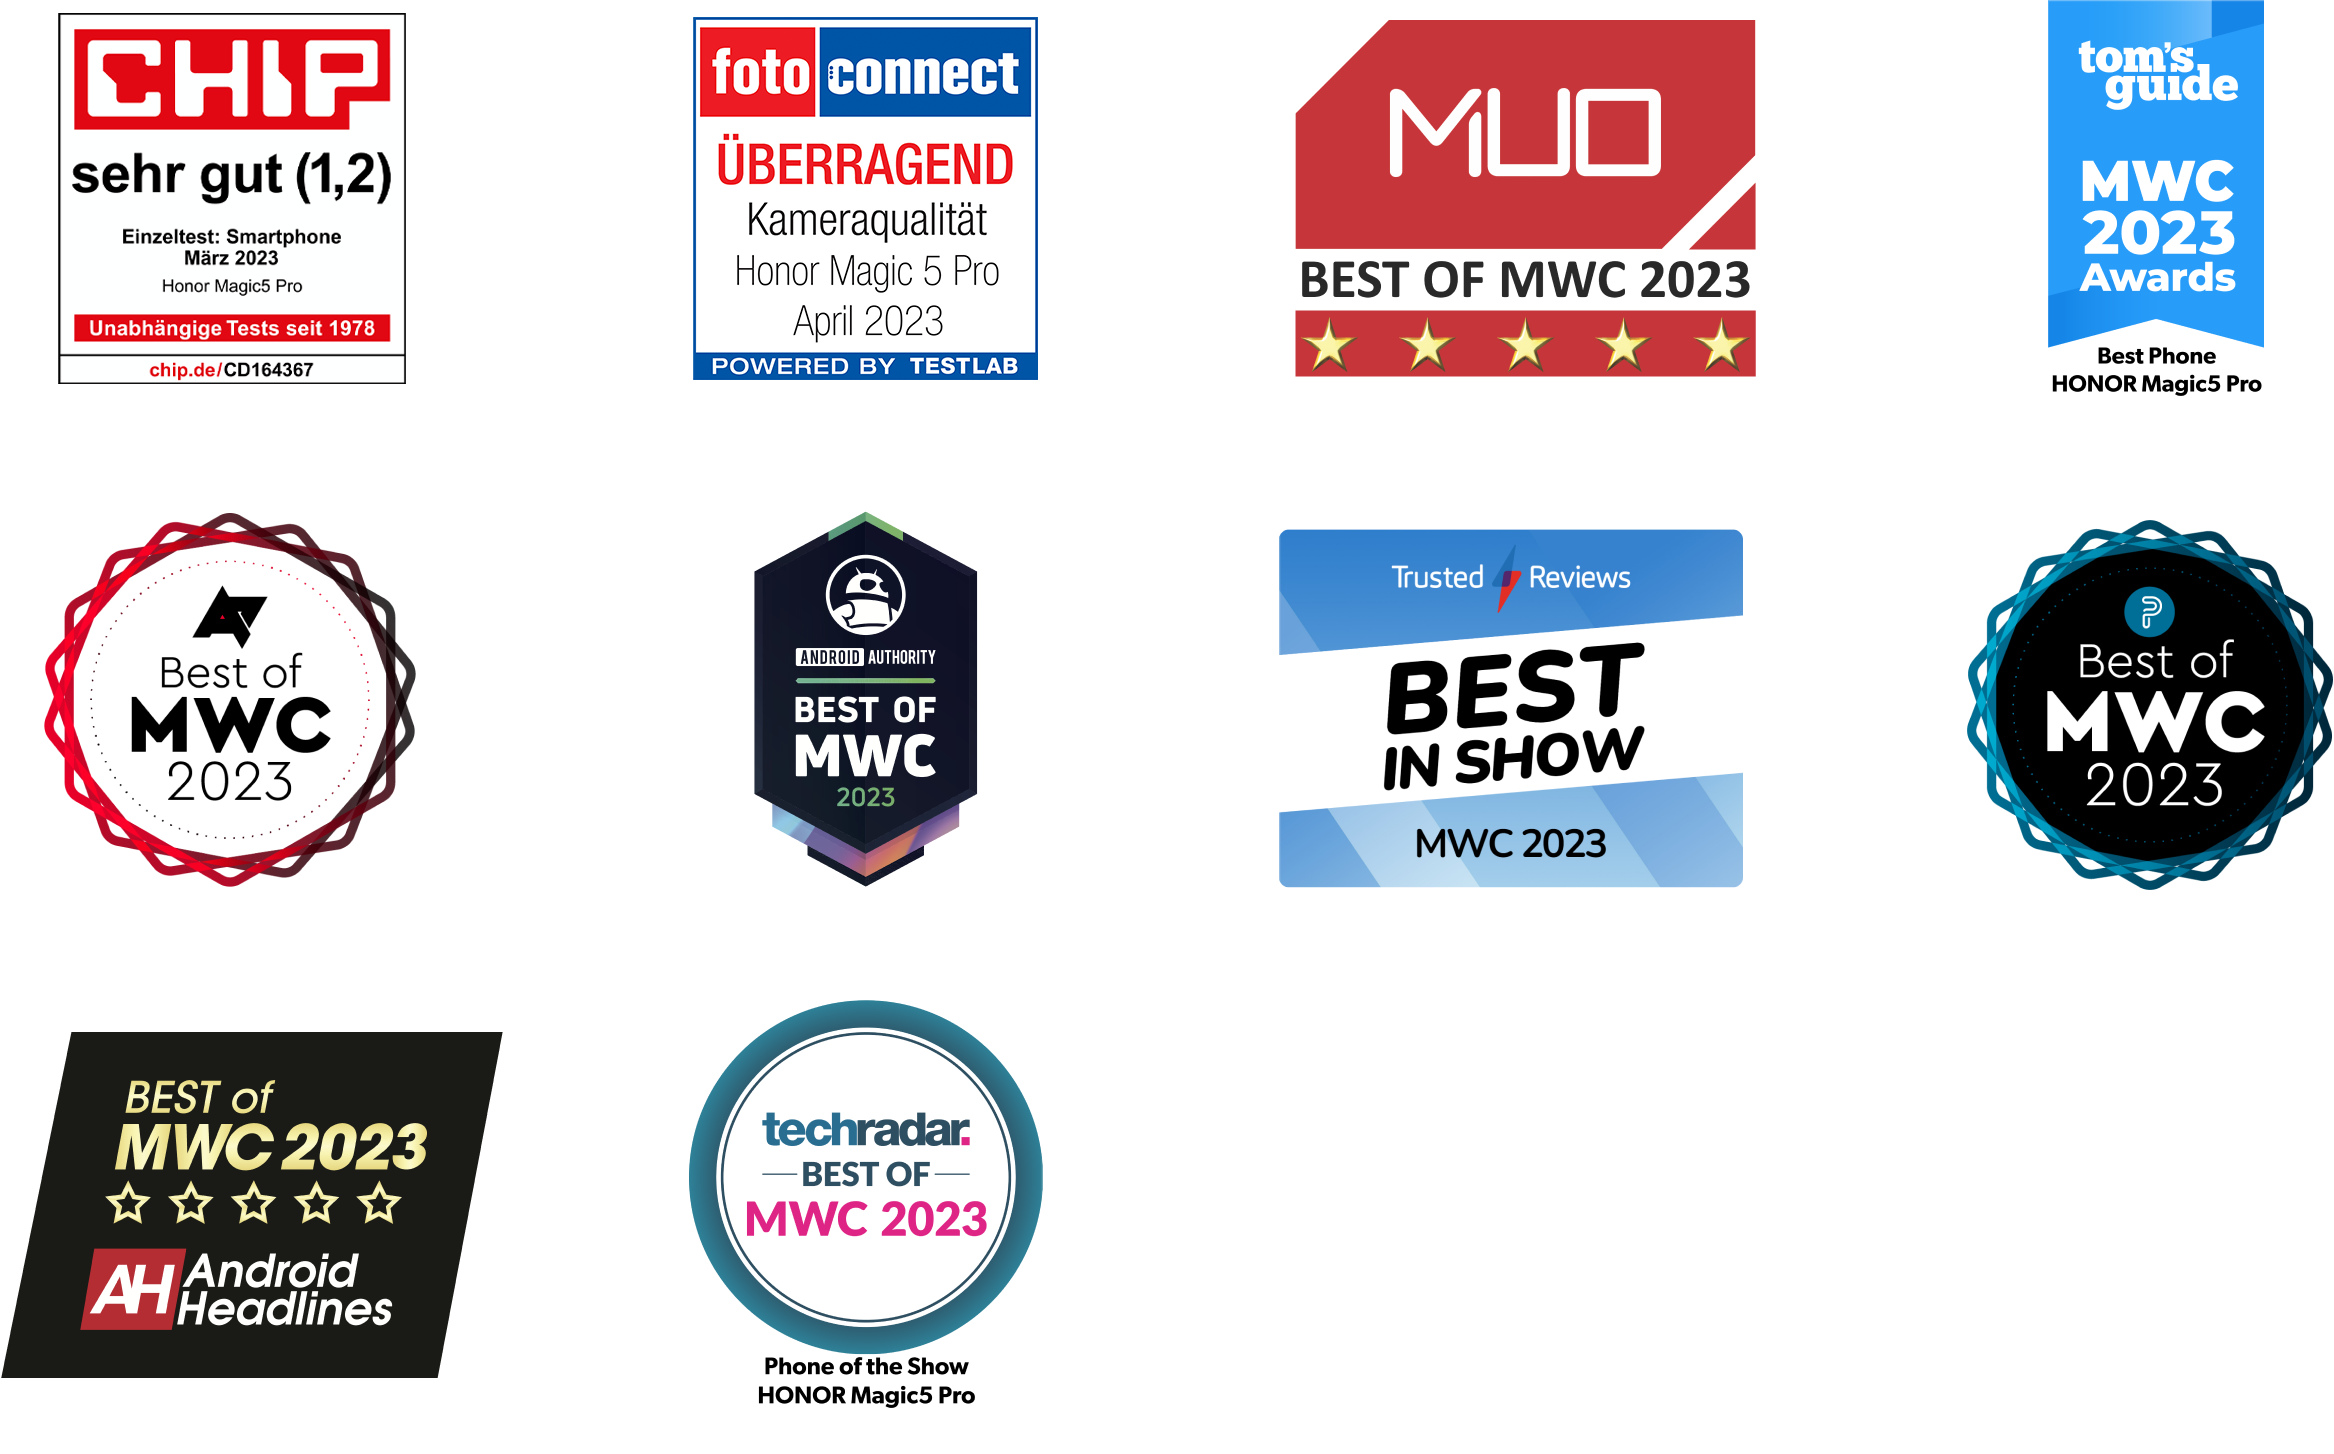 Best of MWC 2023